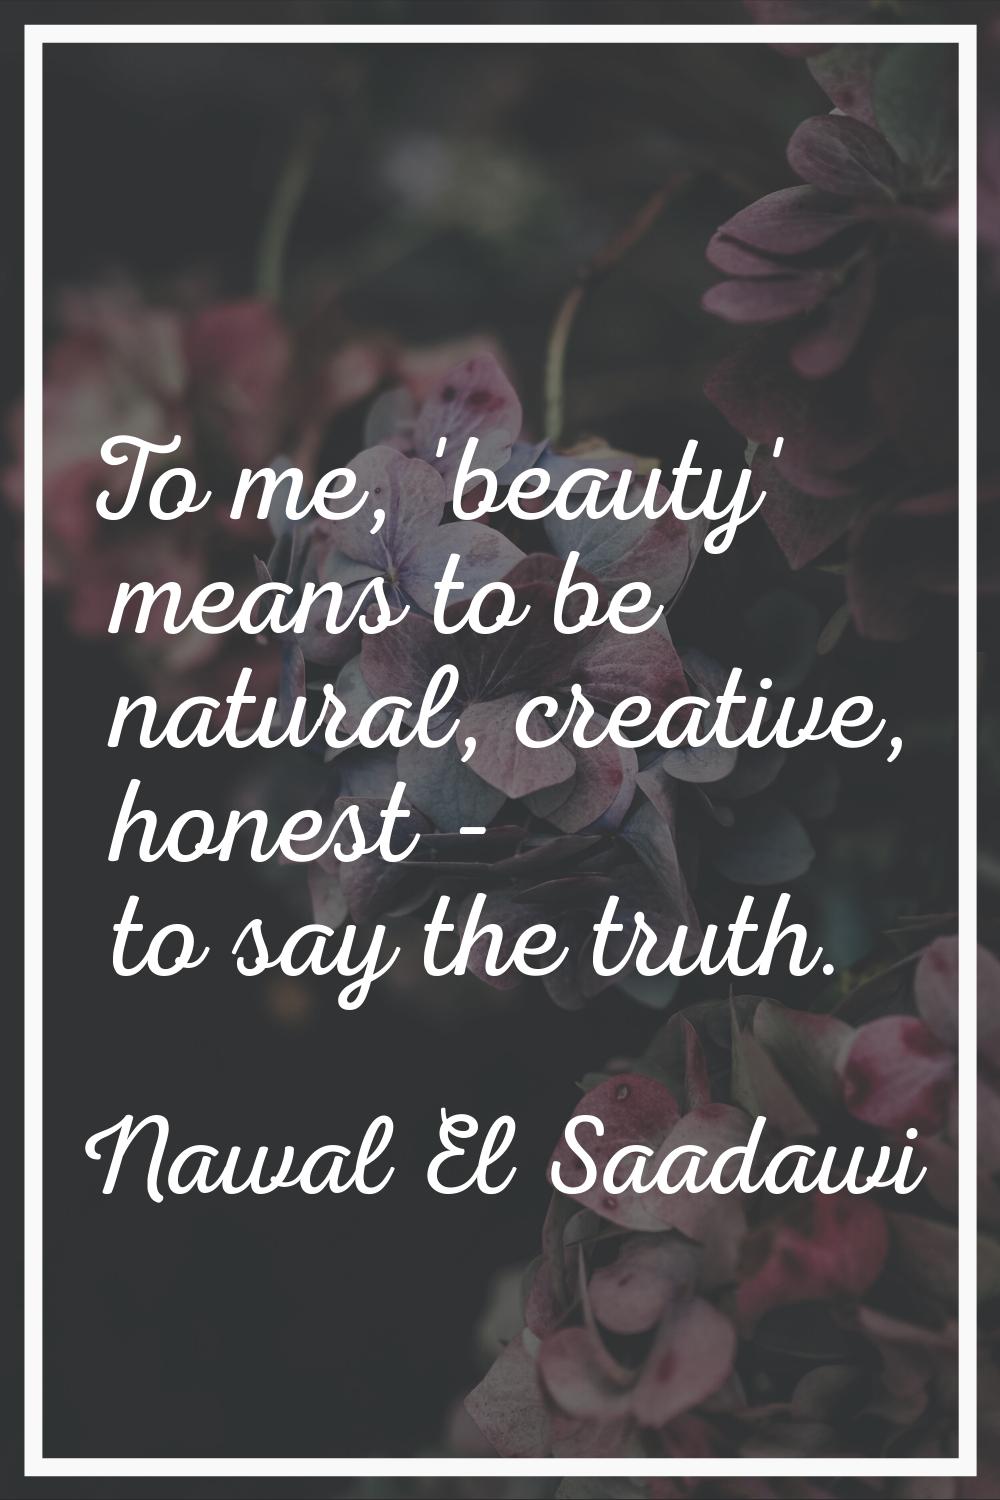 To me, 'beauty' means to be natural, creative, honest - to say the truth.